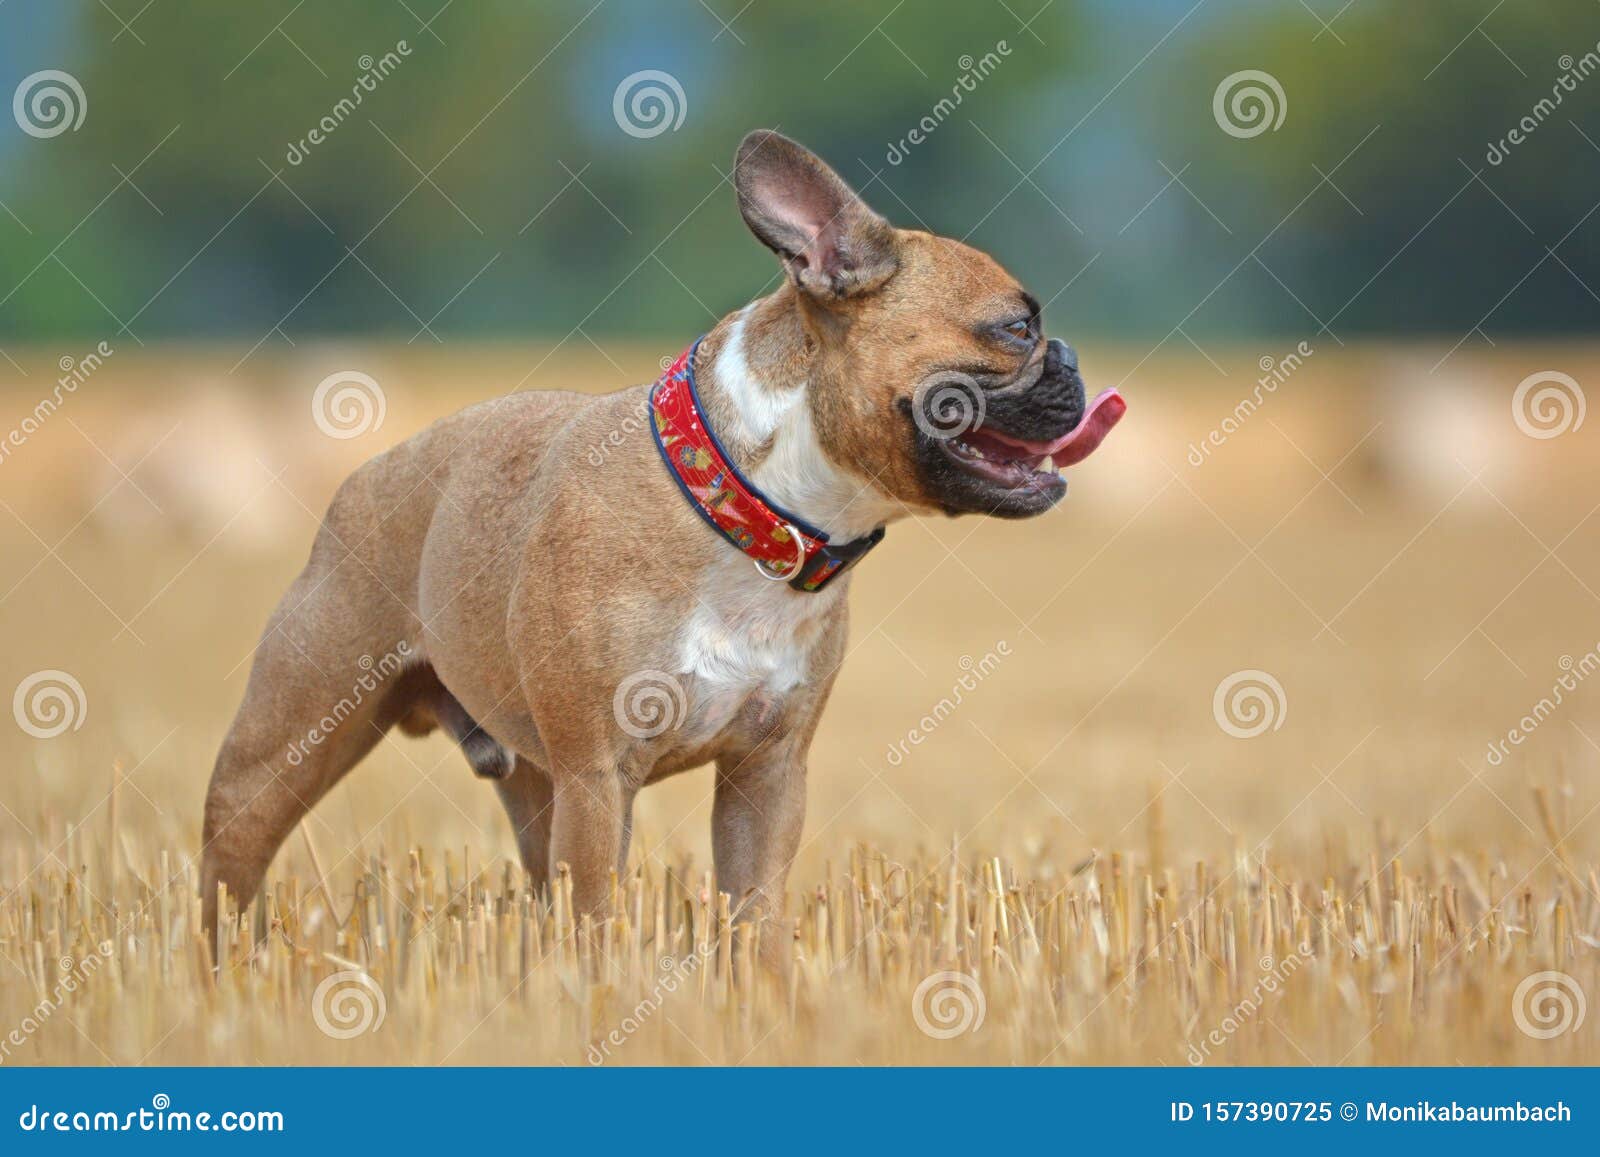 Fawn French Bulldog Dog With Long Legs Standing In A